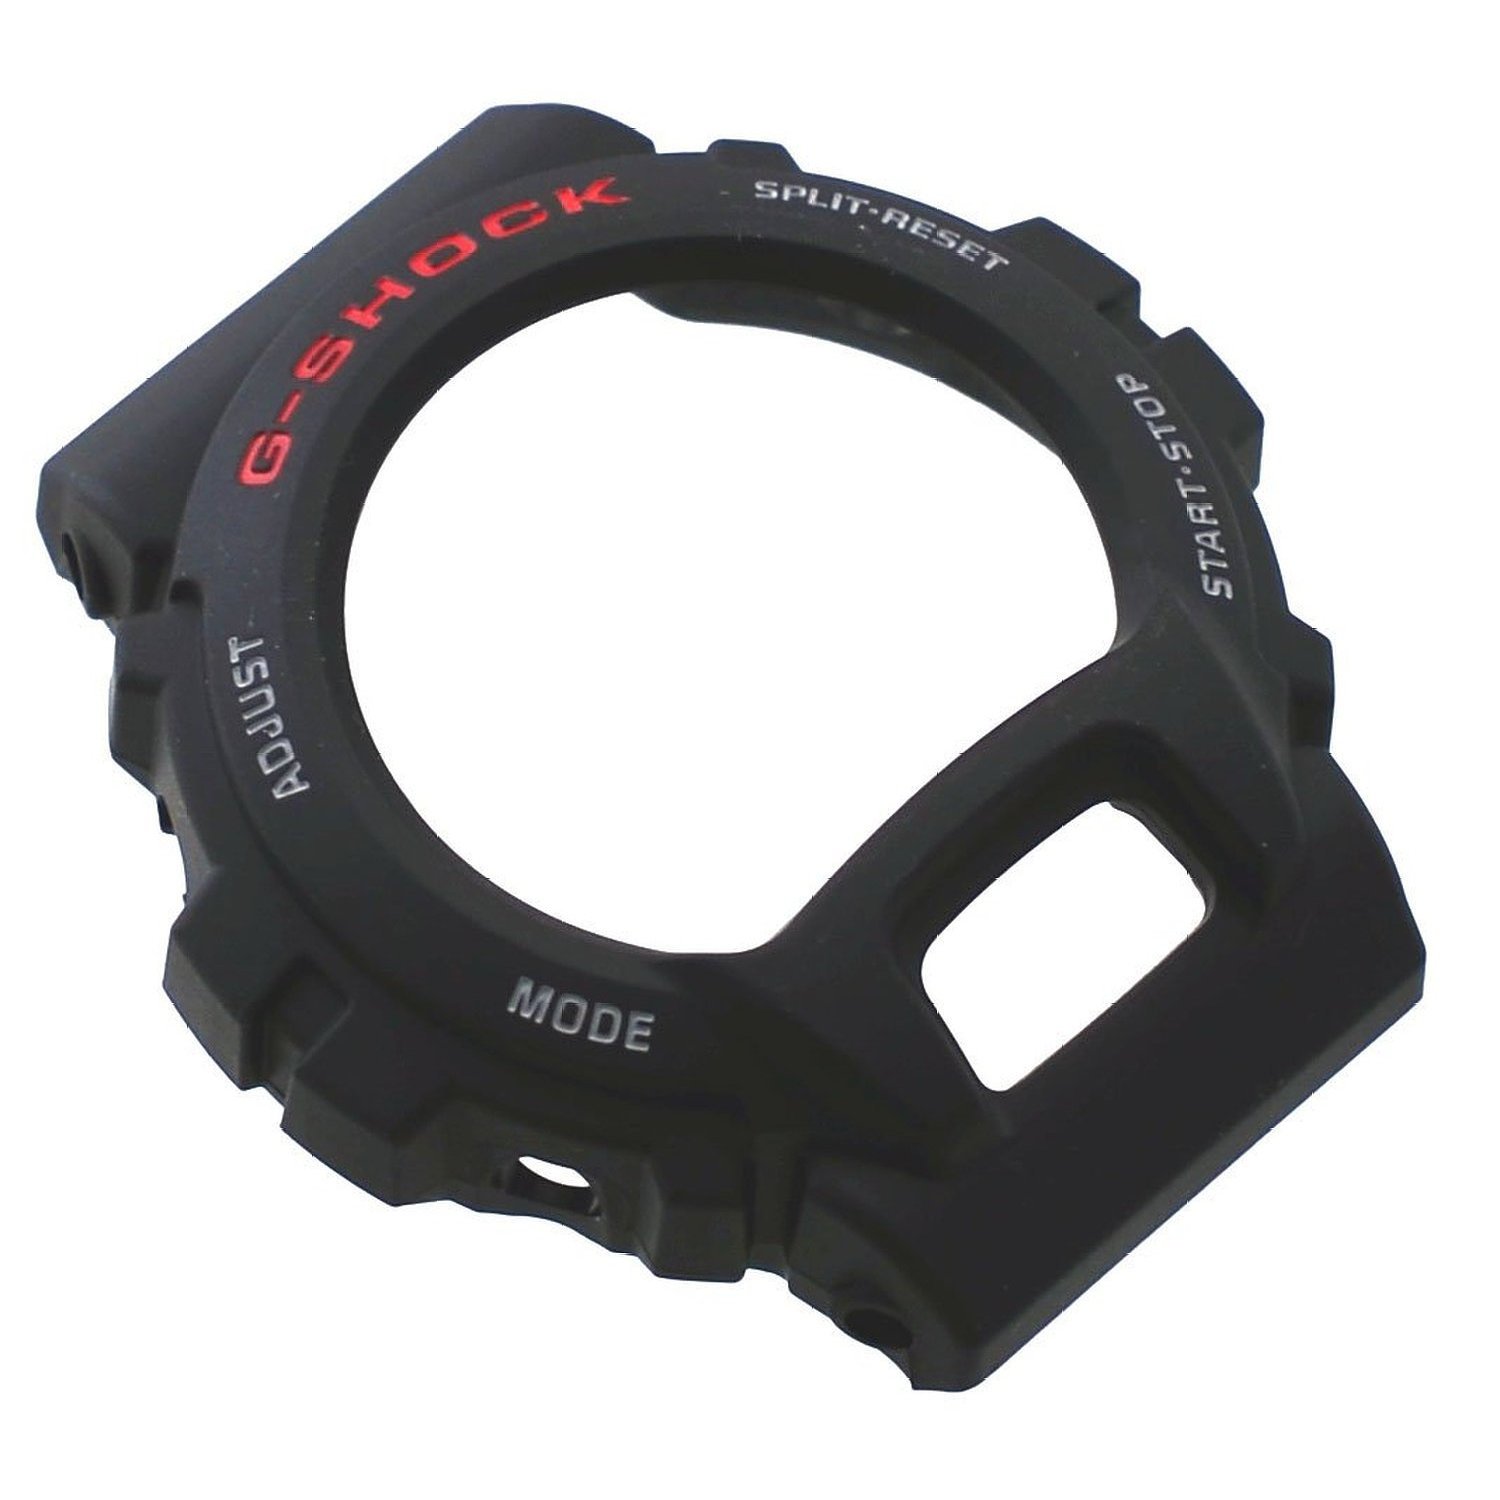 CASIO G-Shock Genuine Model DW6900-1V Replacement Matte Black Resin Bezel to Fit Any DW6900xx Watch